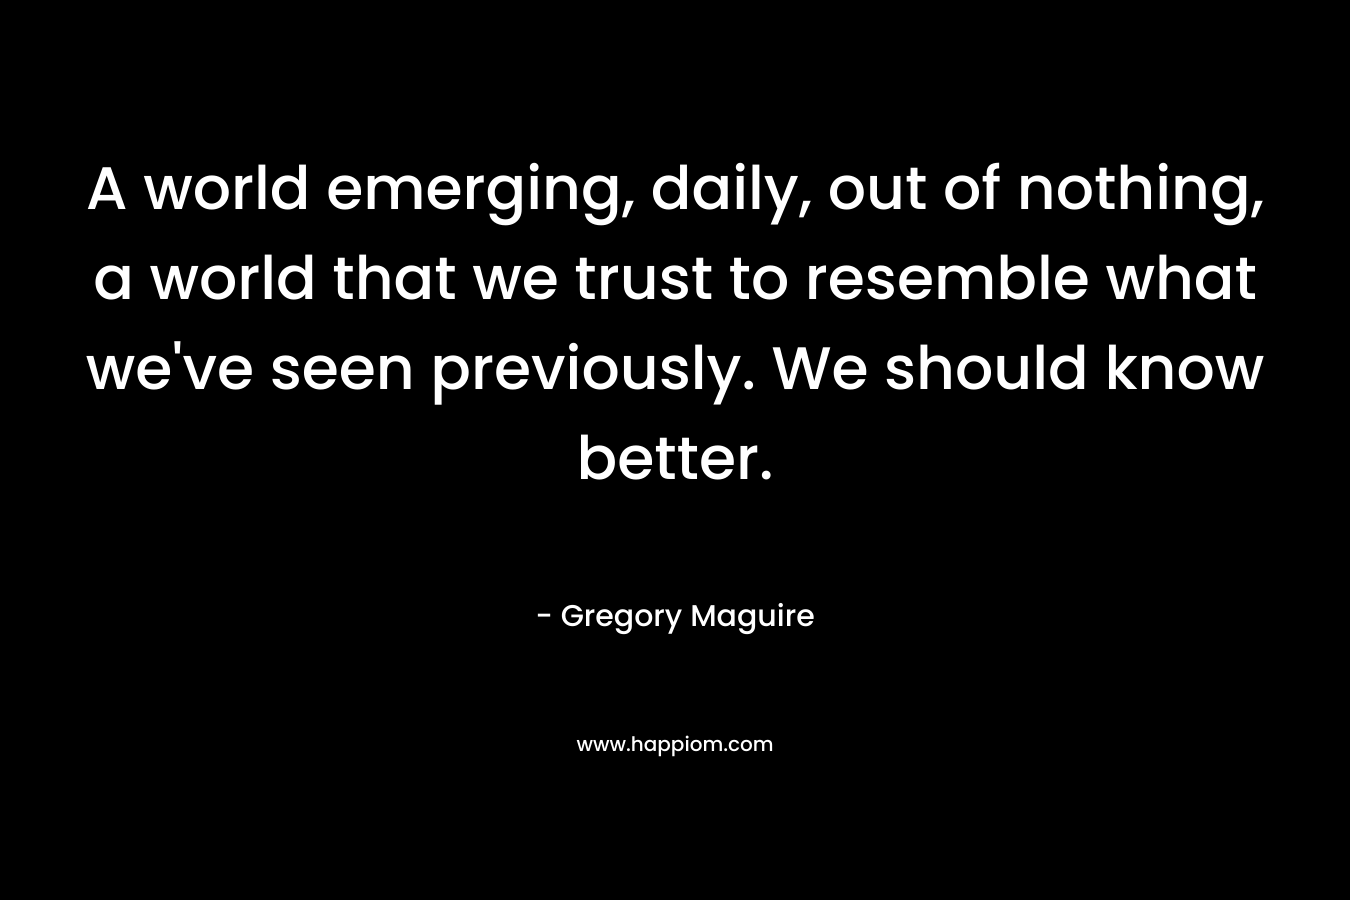 A world emerging, daily, out of nothing, a world that we trust to resemble what we’ve seen previously. We should know better. – Gregory Maguire